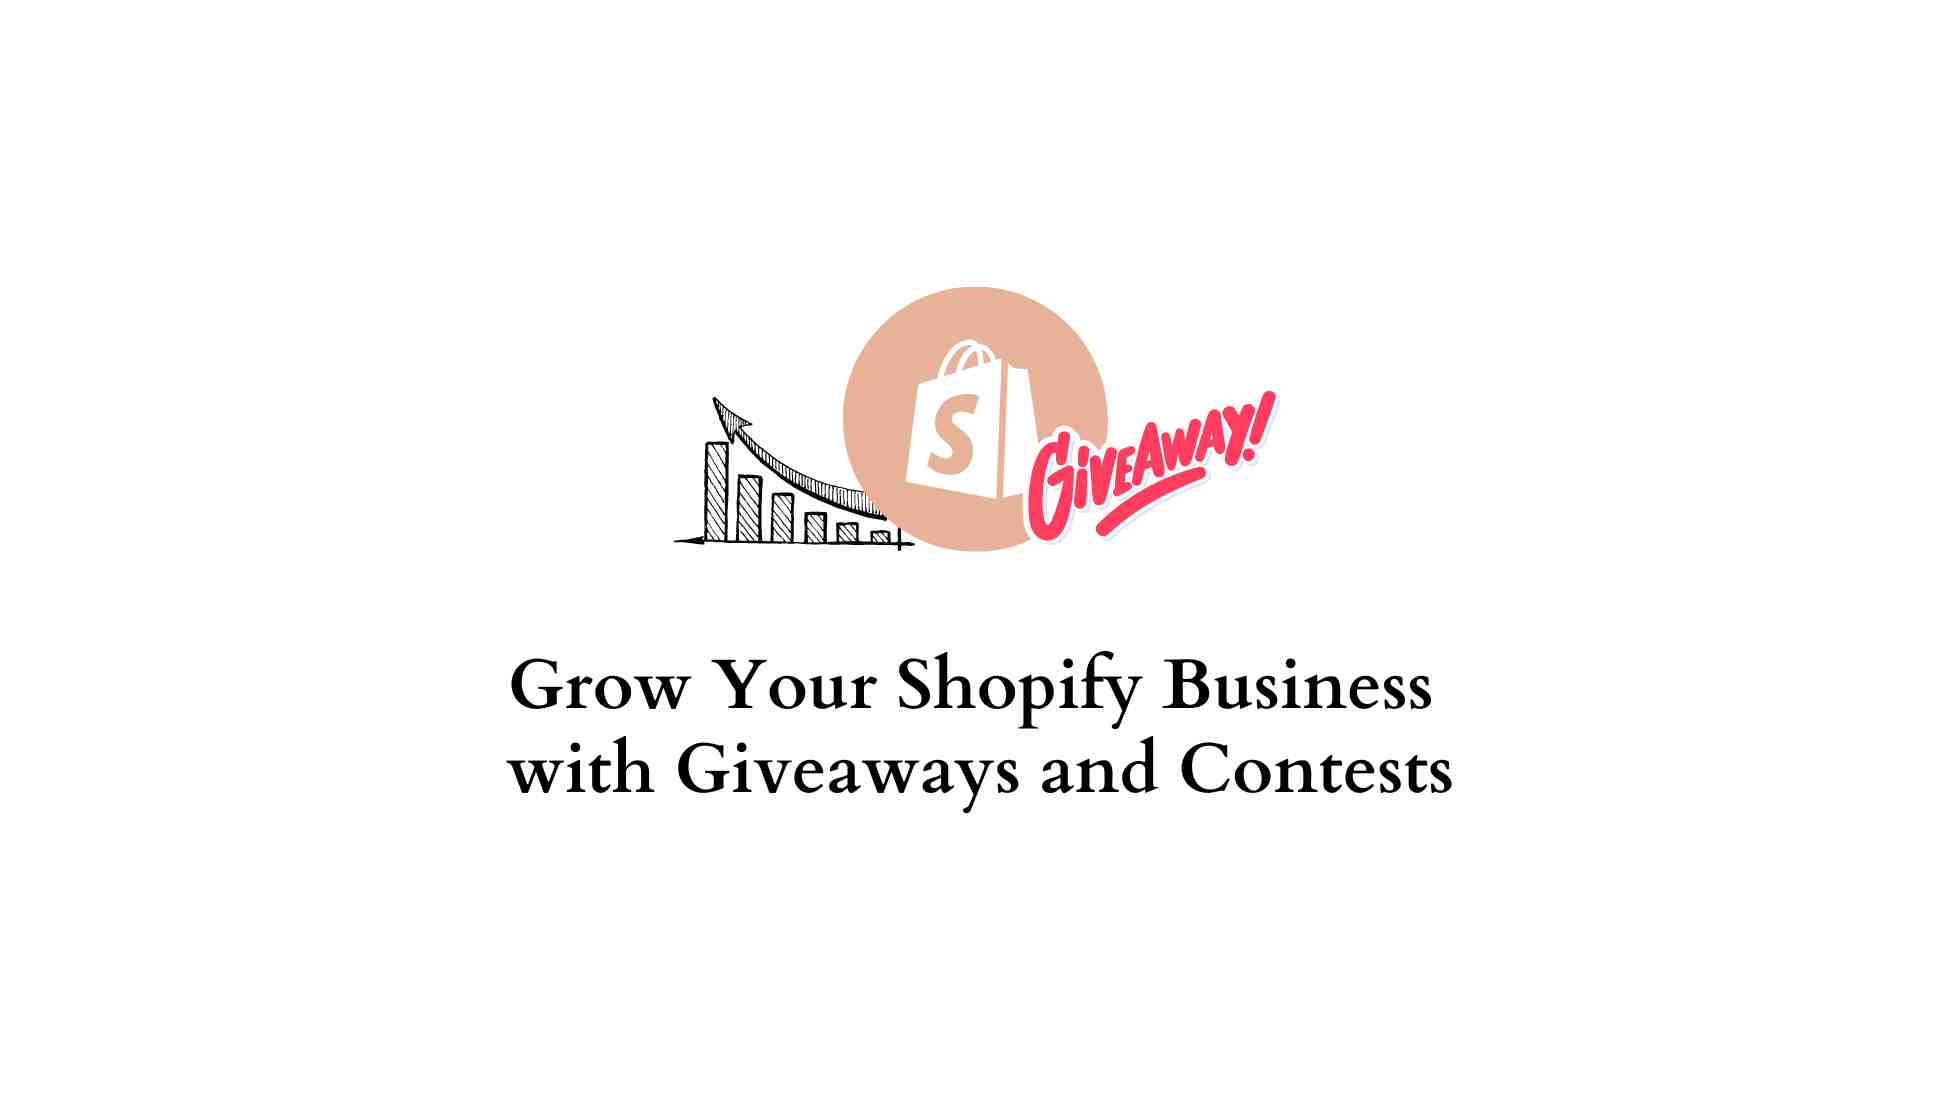 The Giveaway Company, Giveaways and Contests